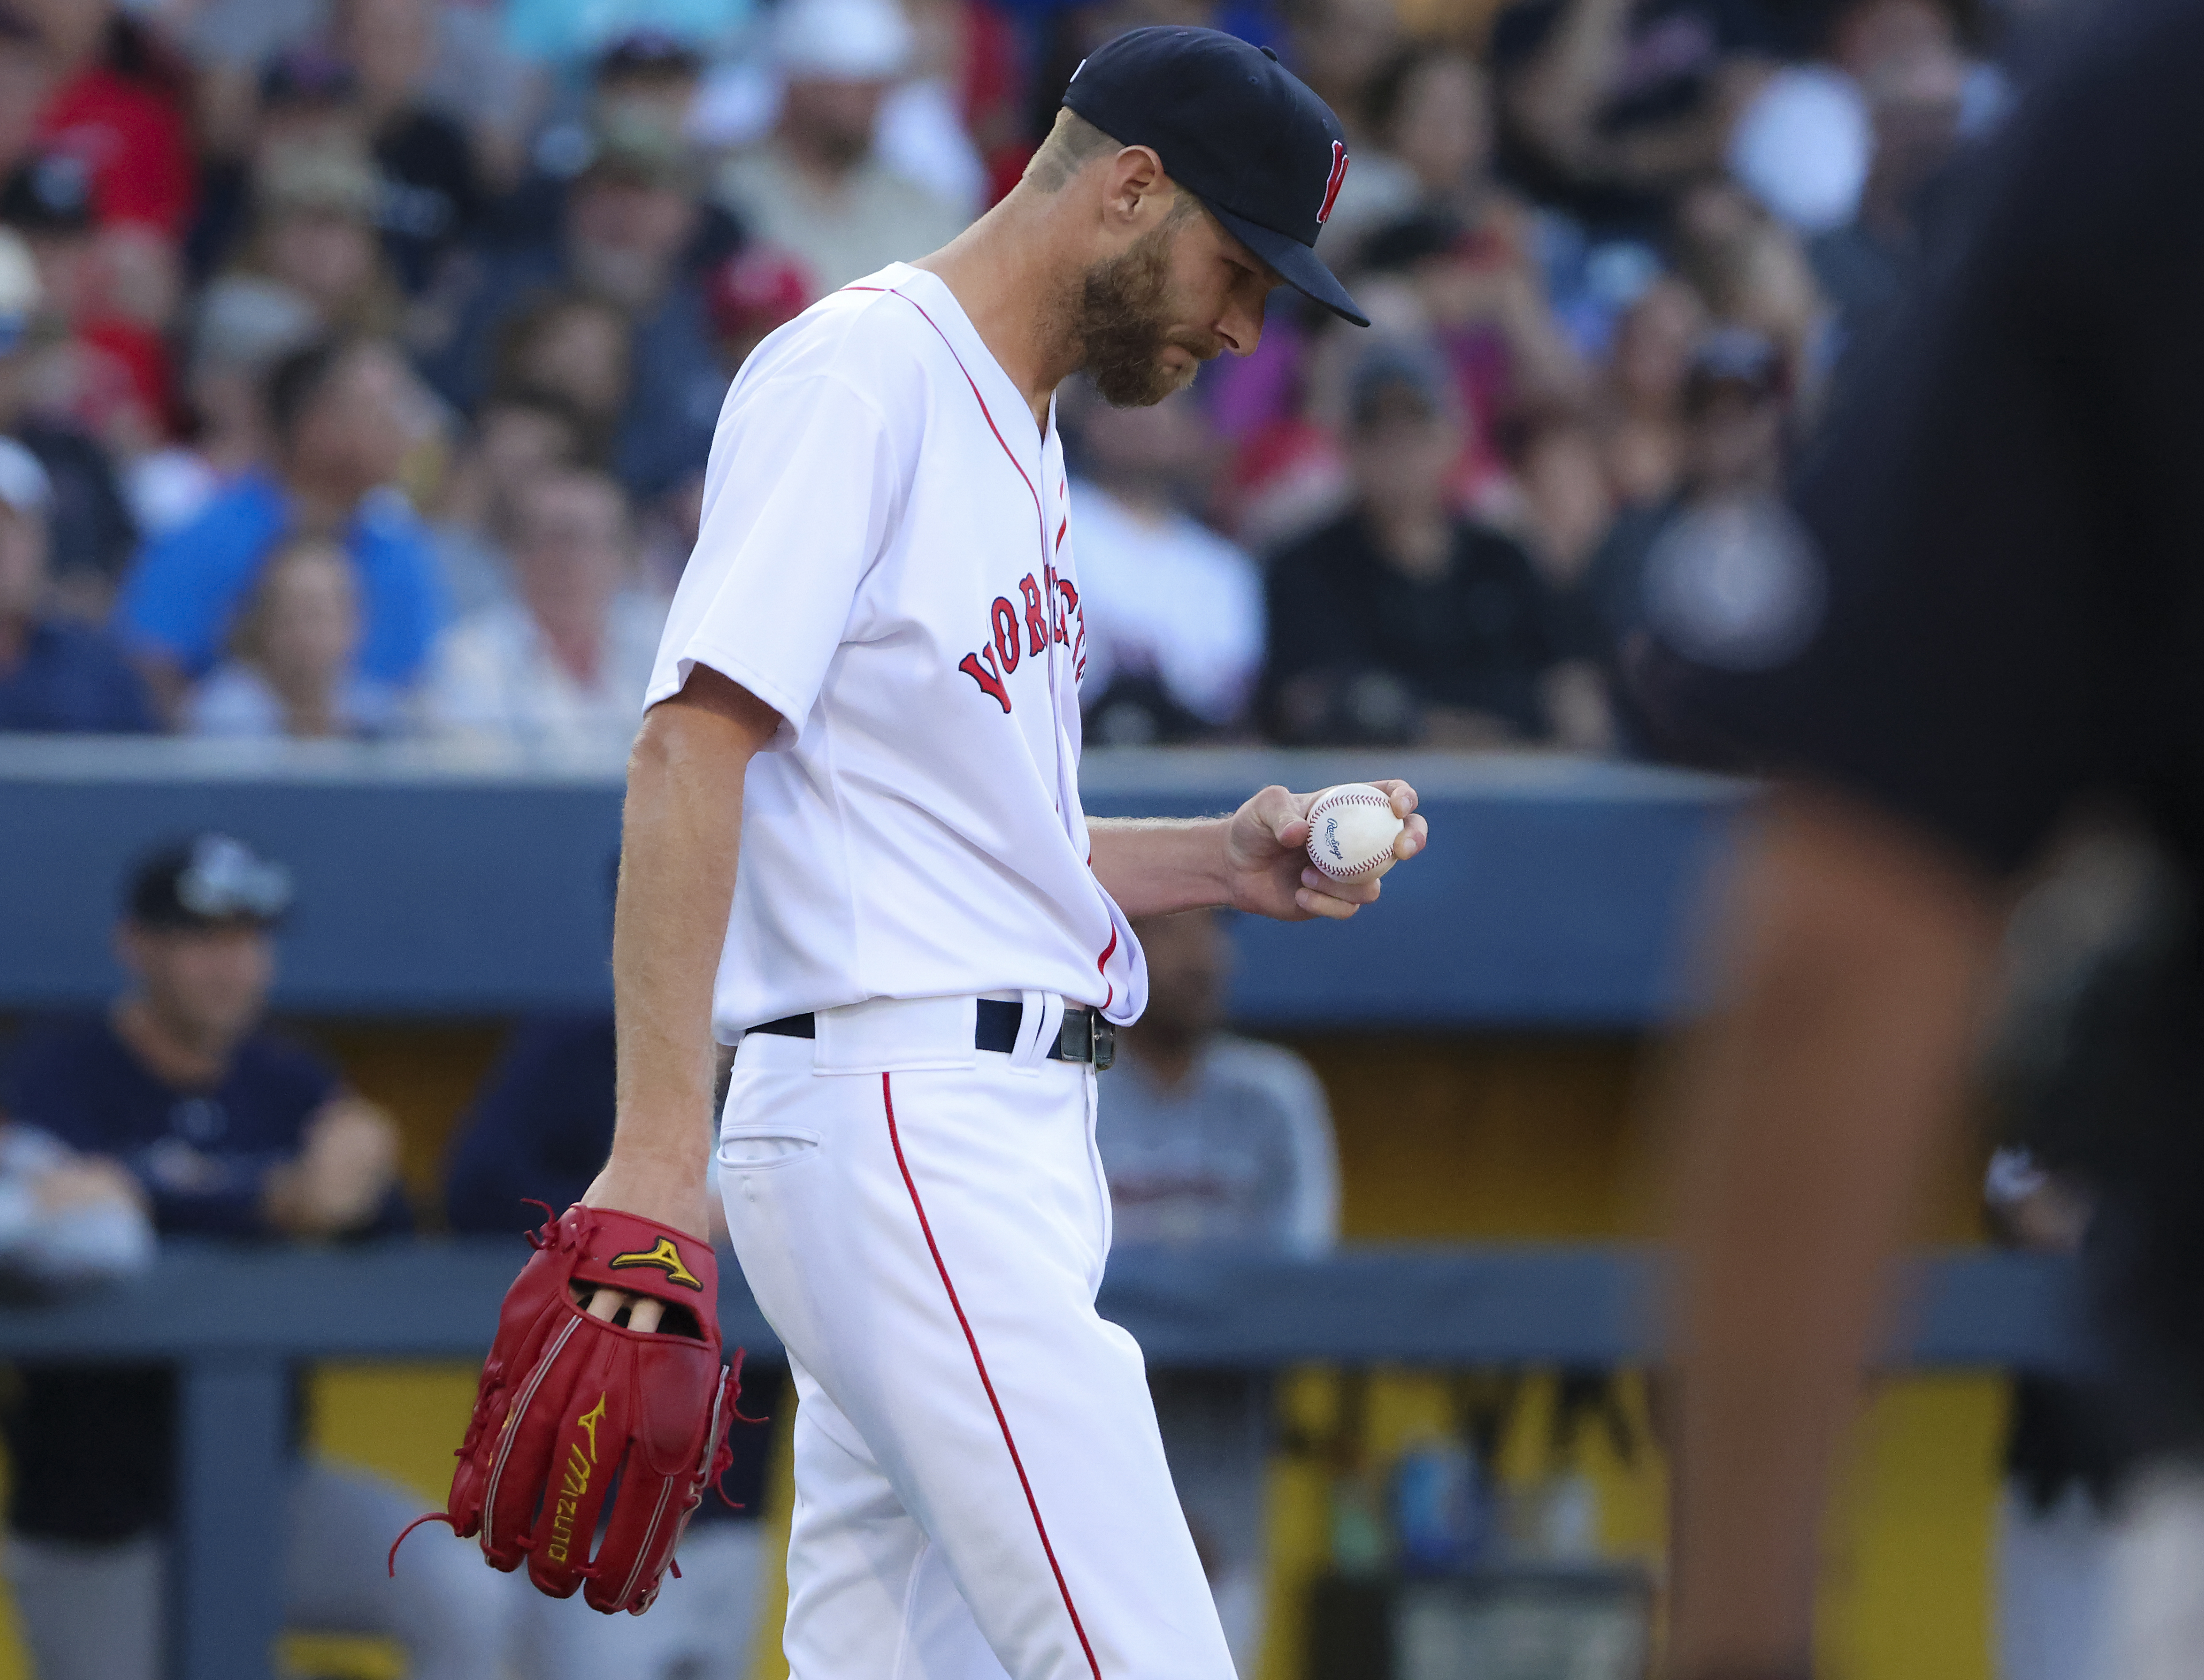 Report: Chris Sale Refused To Pitch In Throwback Jersey, Cut It Up